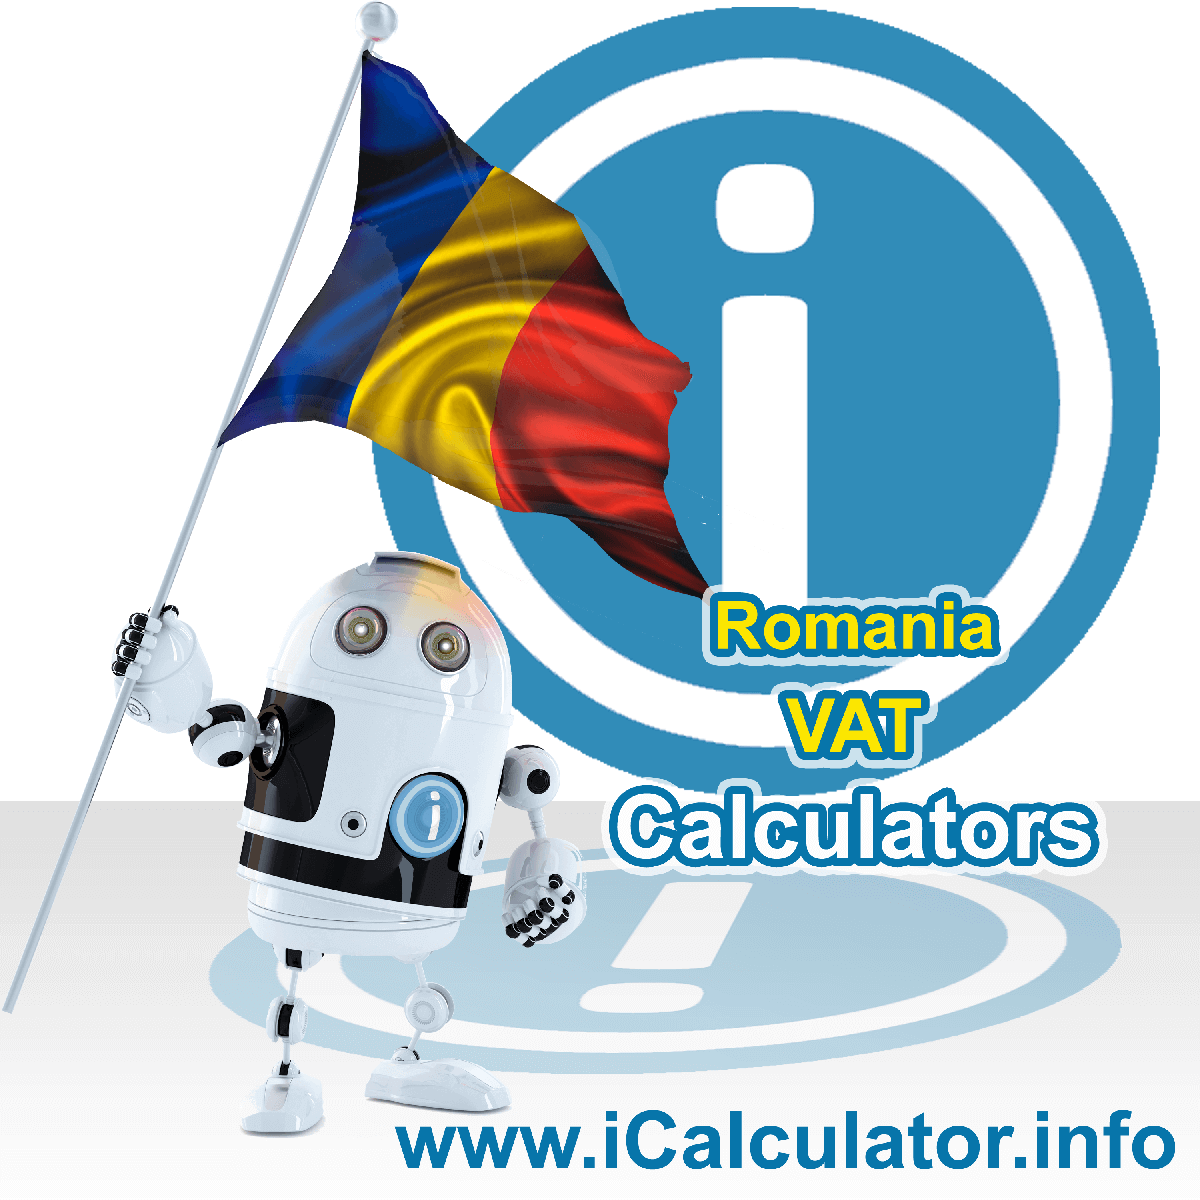 Romania VAT Calculator. This image shows the Romania flag and information relating to the VAT formula used for calculating Value Added Tax in Romania using the Romania VAT Calculator in 2023